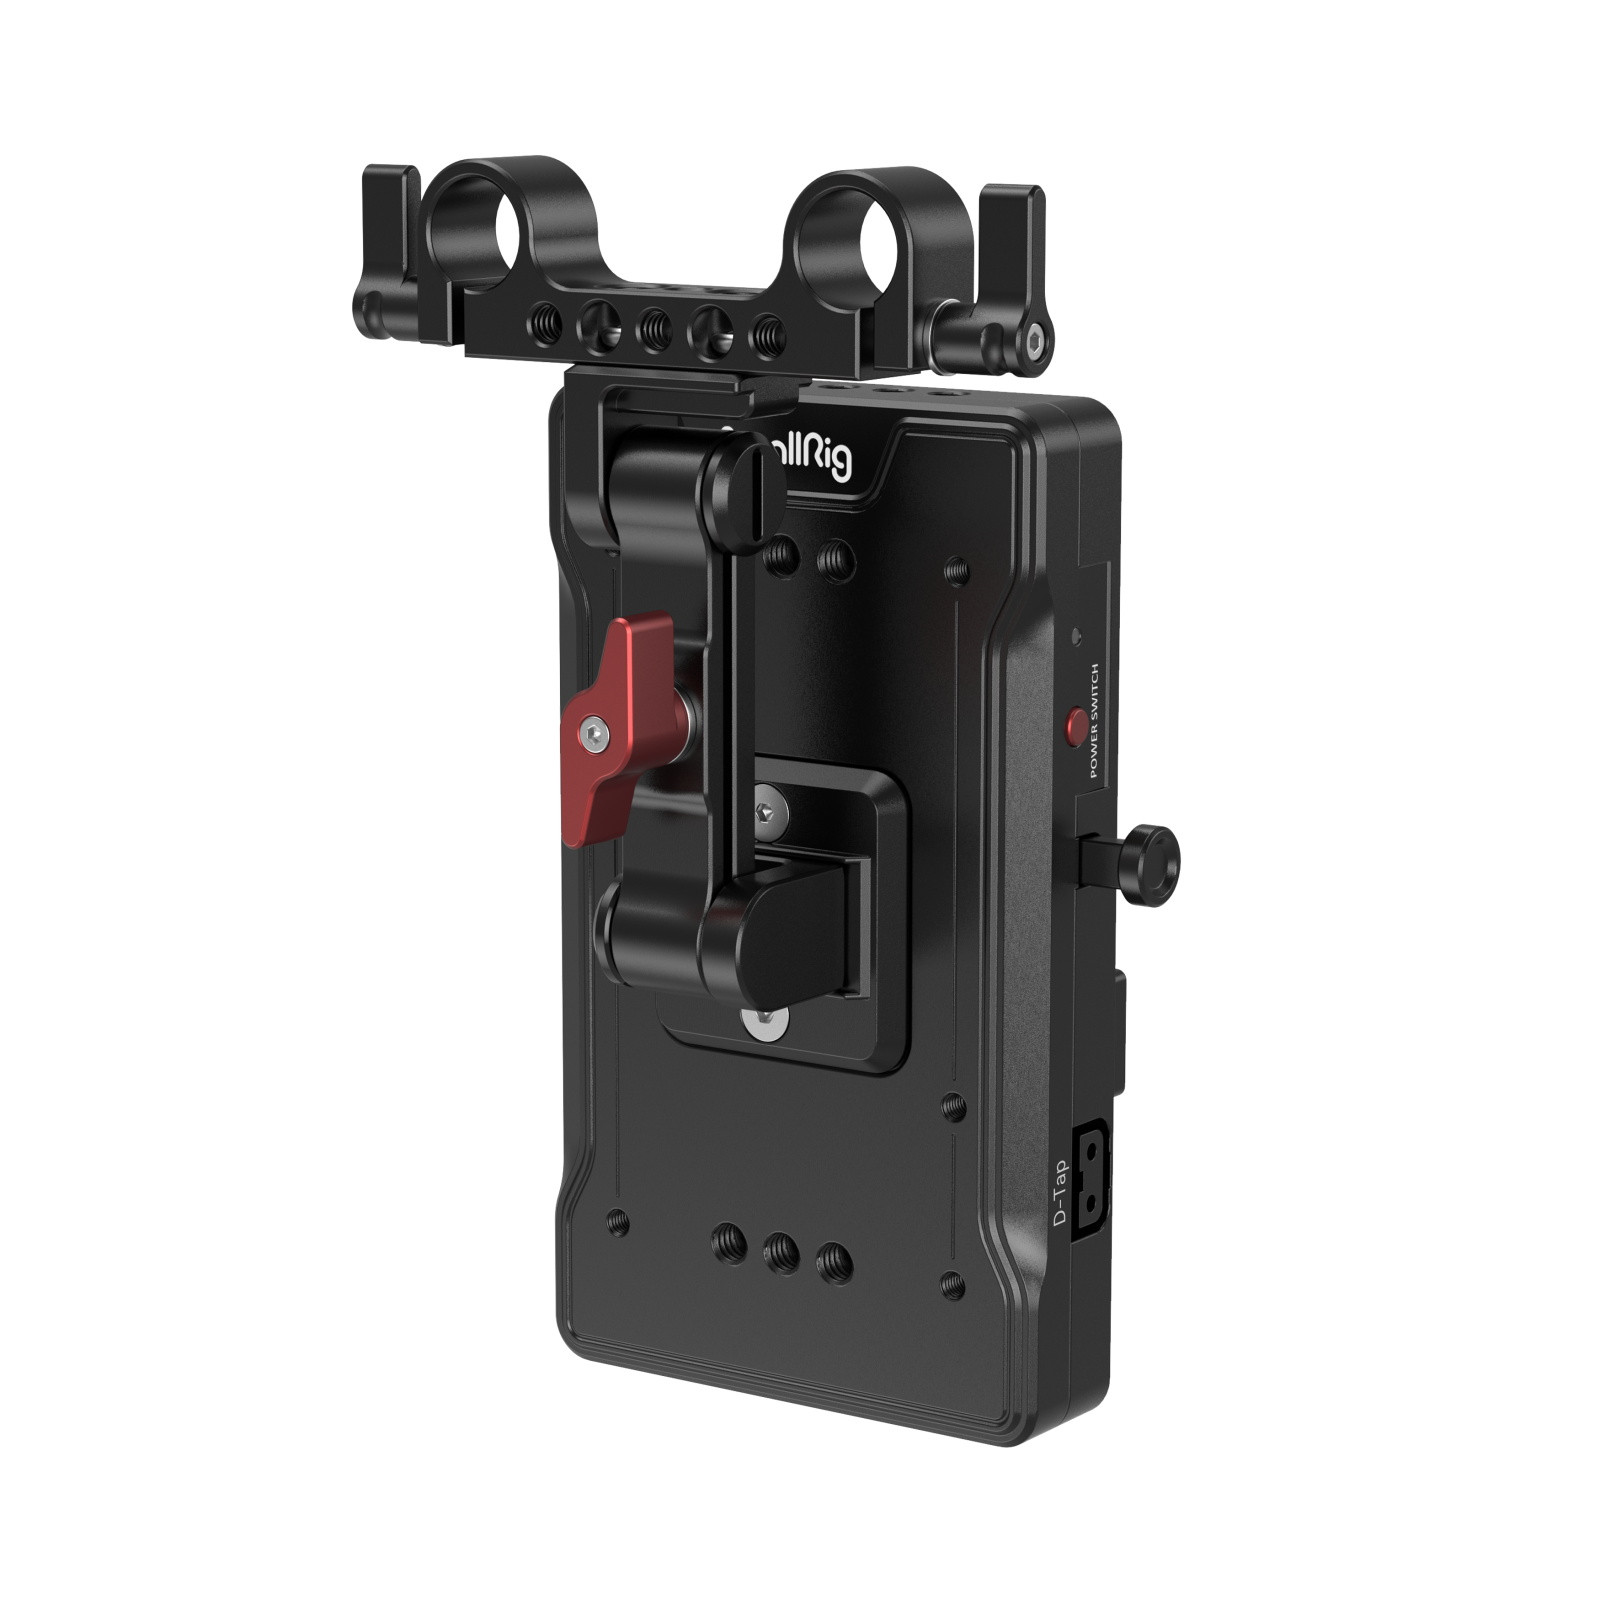 SmallRig Advanced V-Mount Battery Mount Plate with Adjustable Arm 3204B